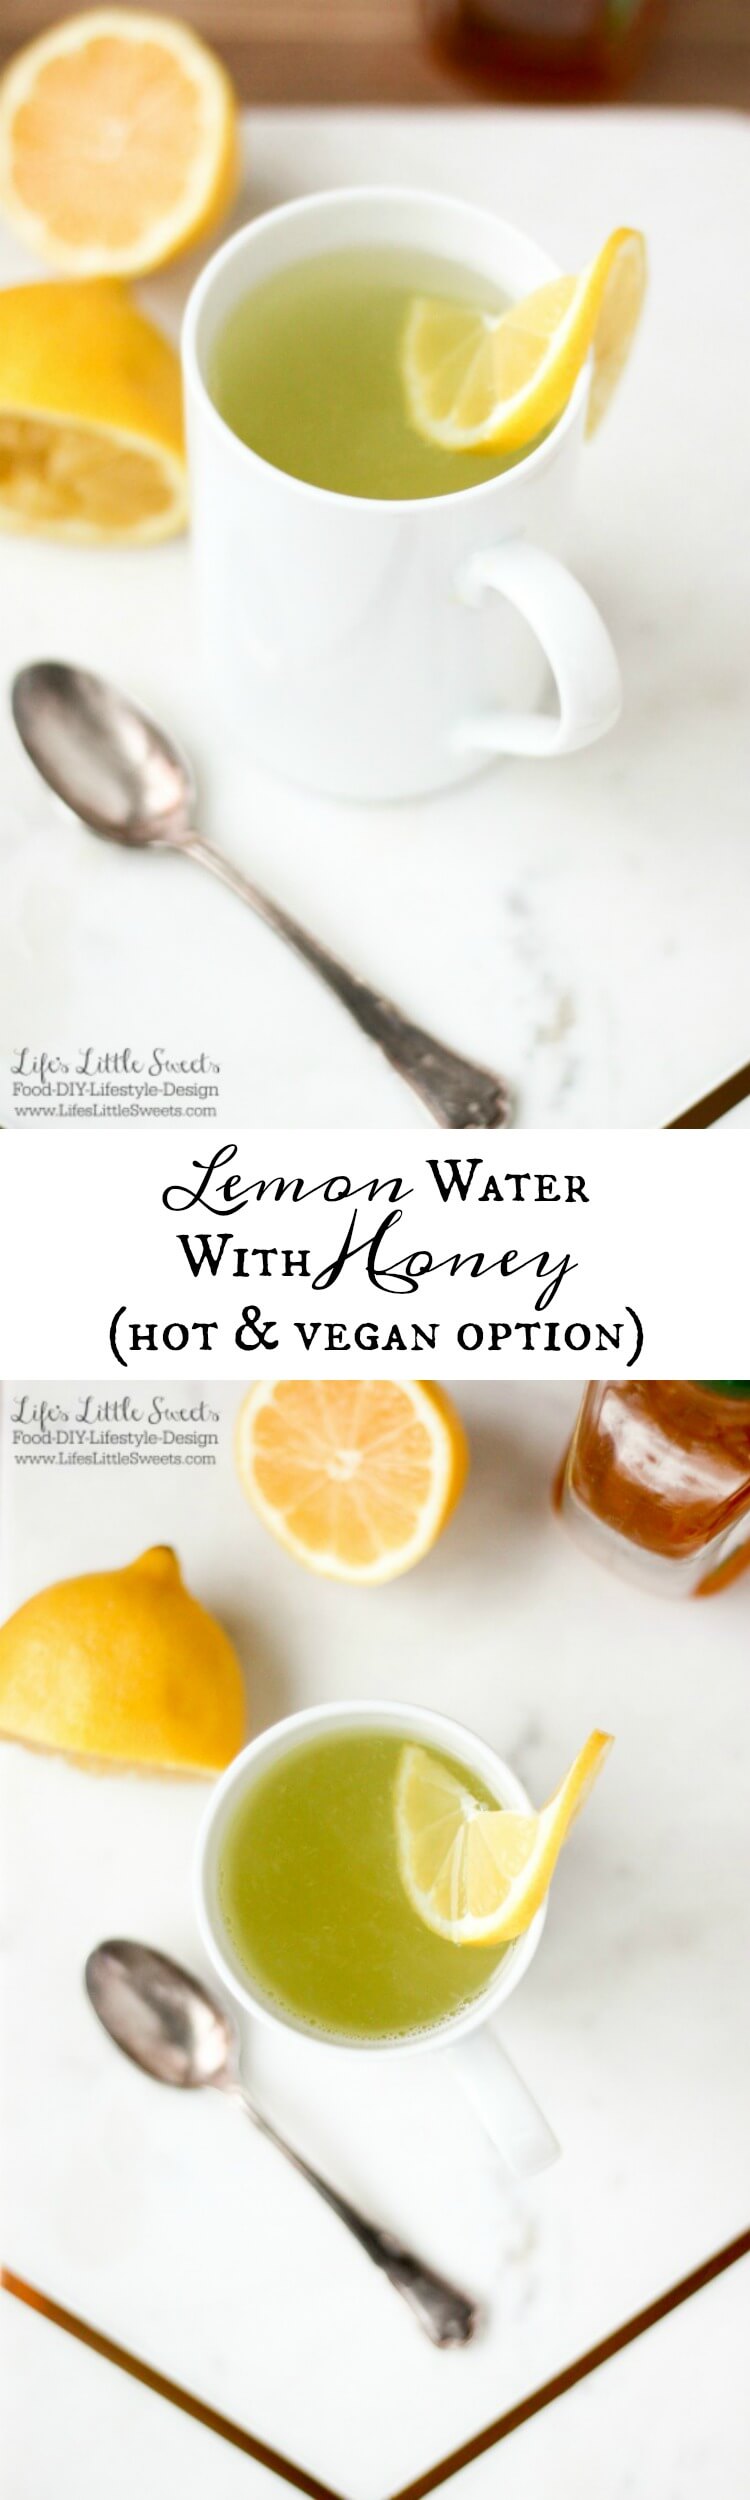 Lemon Water With Honey Hot www.LifesLittleSweets.com Sara Maniez Drink Agave Recipe 750x2500 Pin for Pinterest